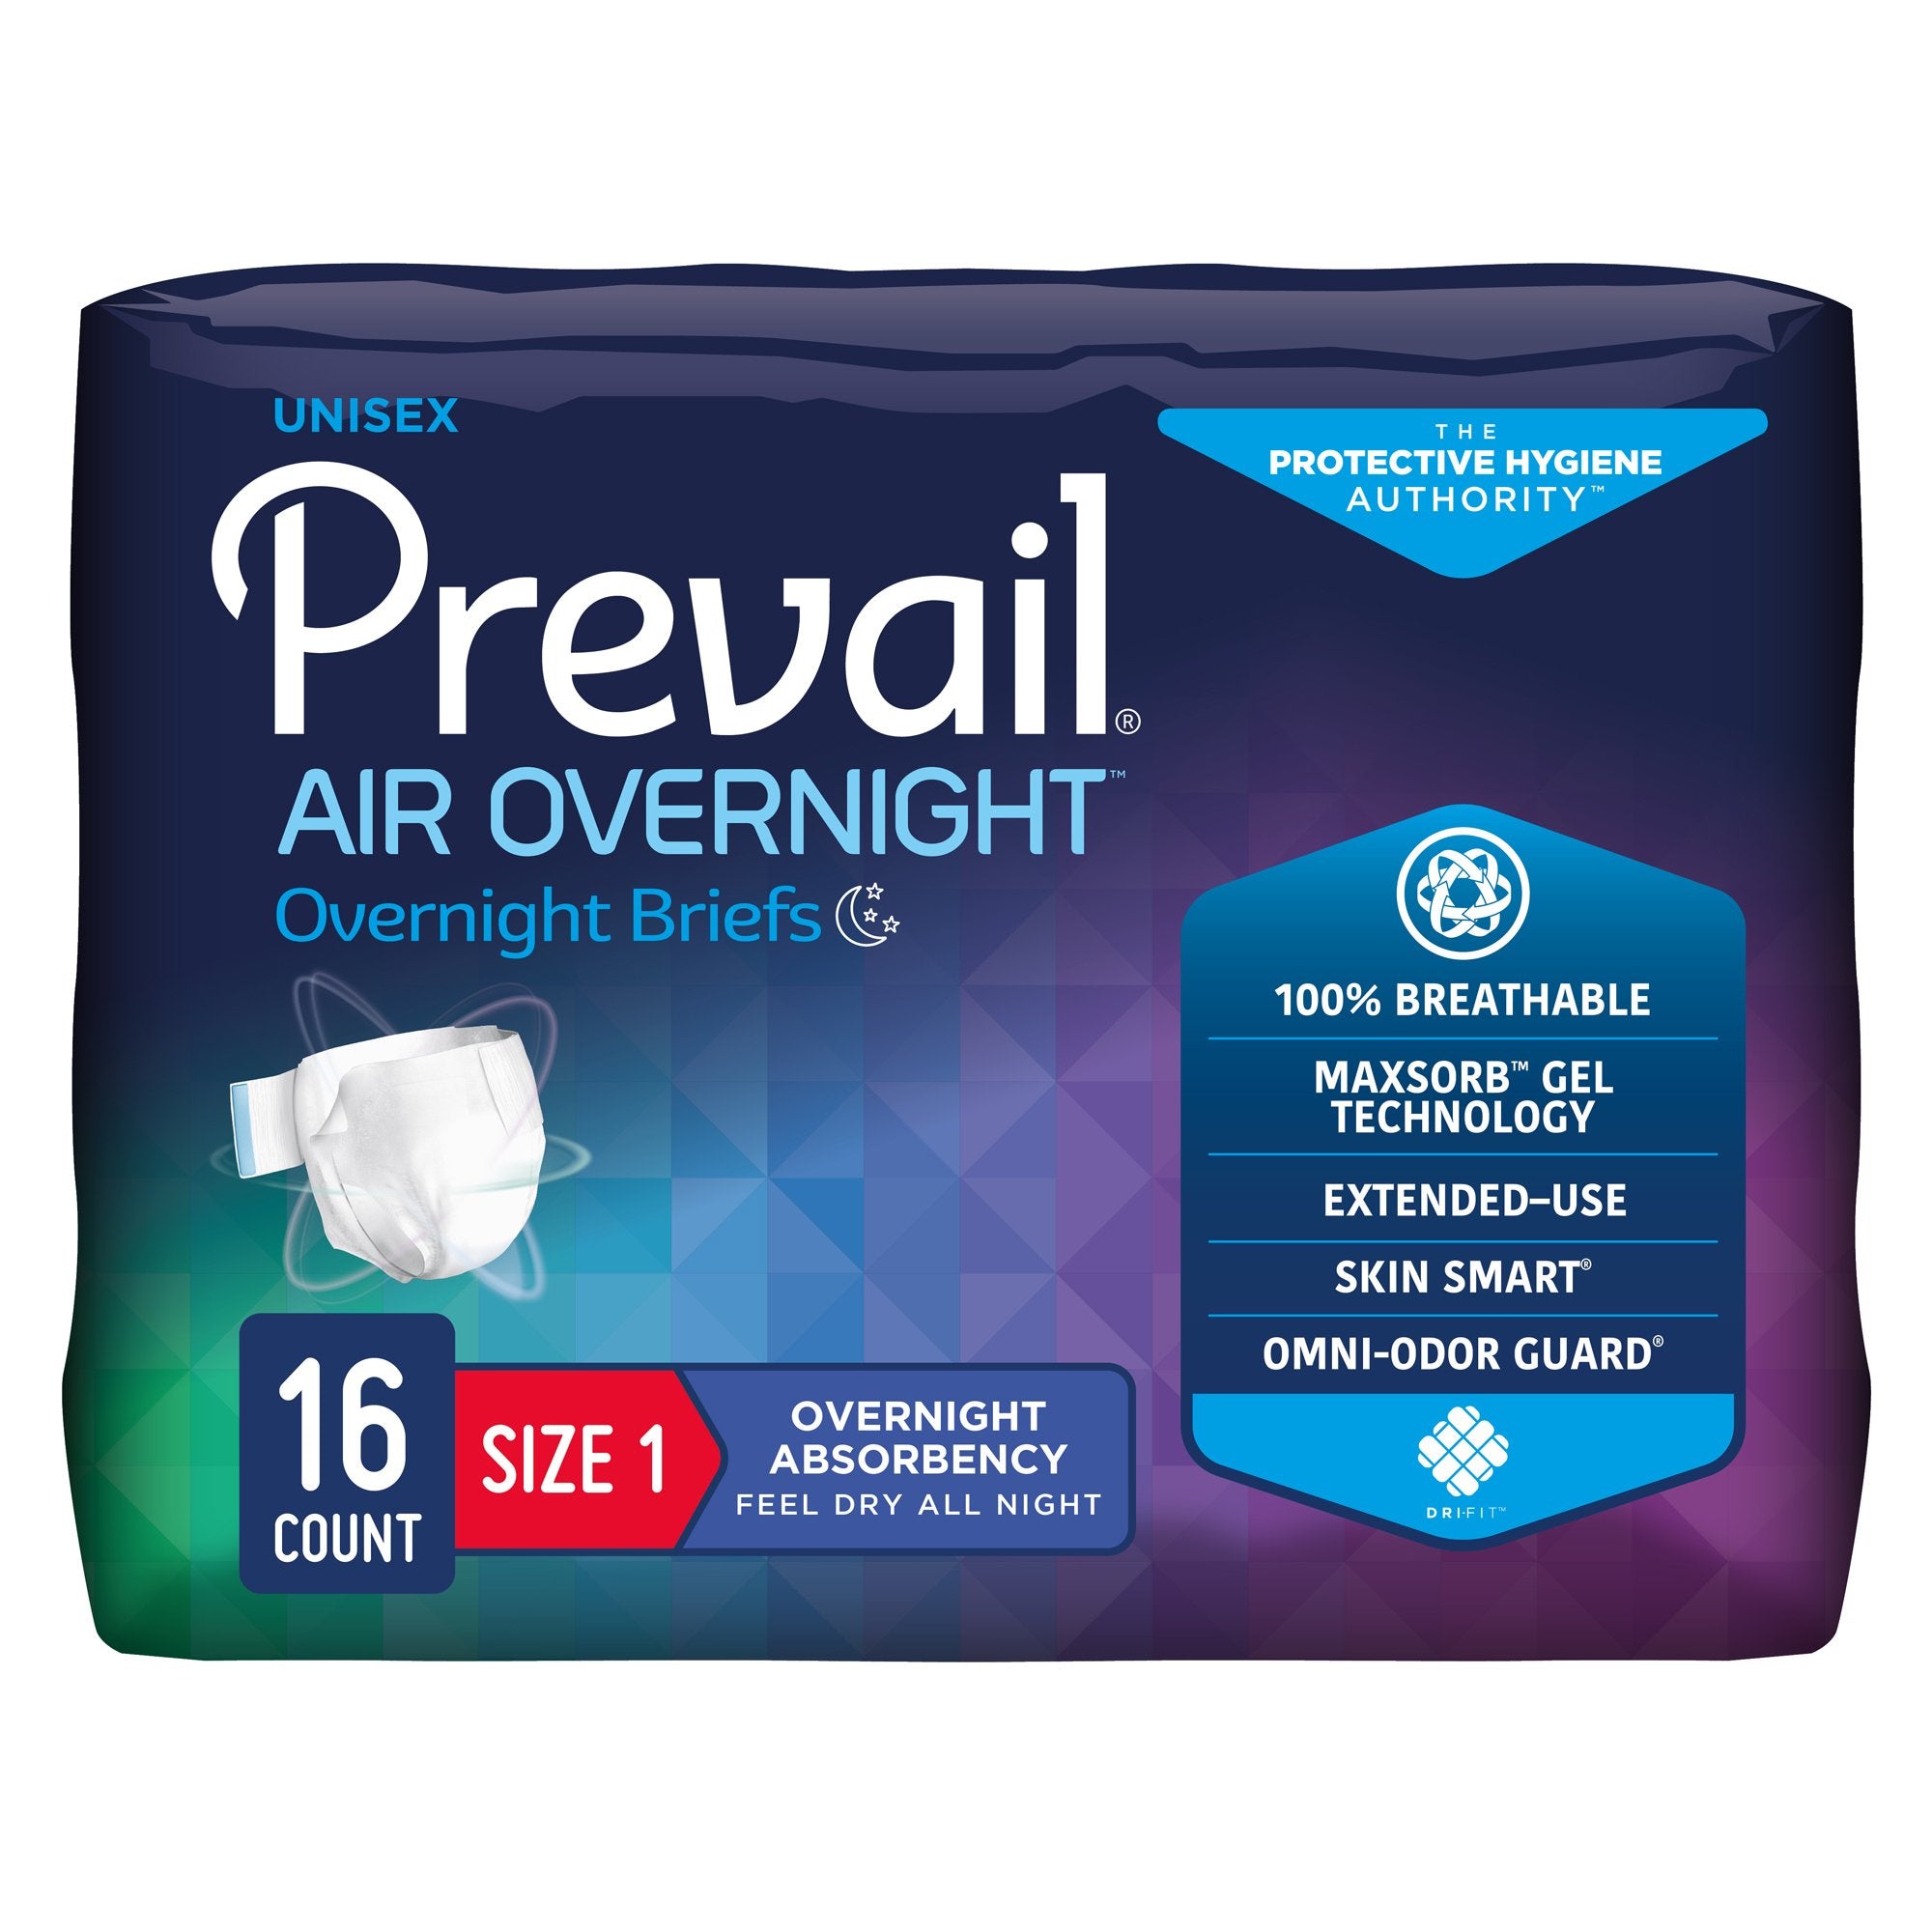 Unisex Adult Incontinence Brief Prevail Air Overnight Size 1 Disposable Heavy Absorbency